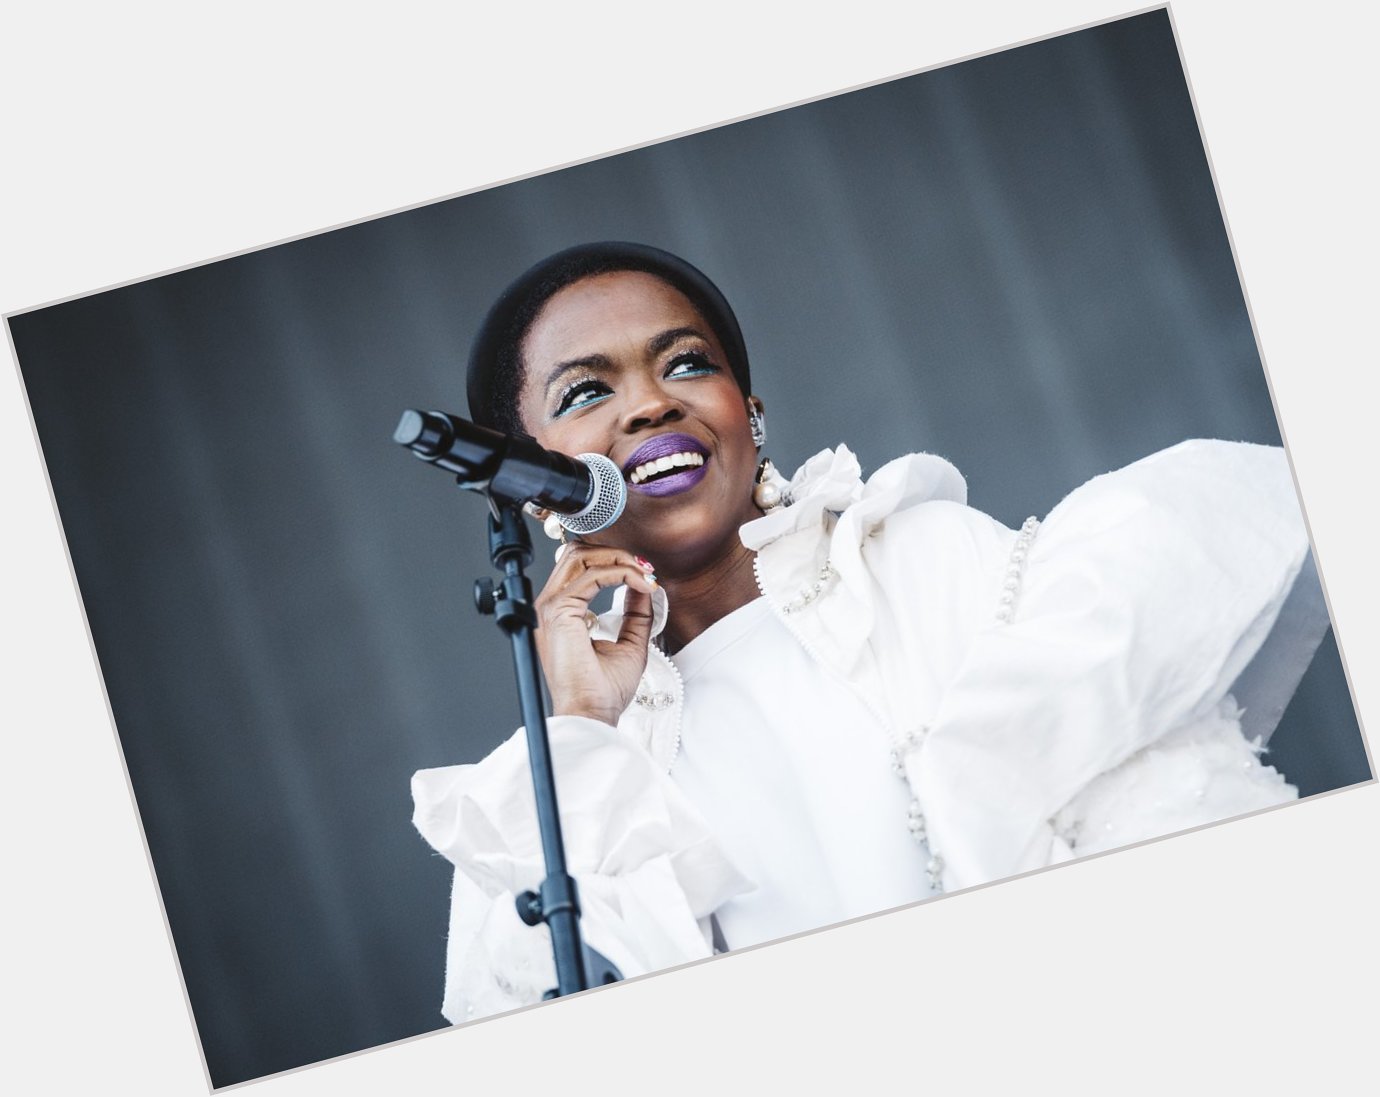 Happy Birthday to the Queen Lauryn Hill!  